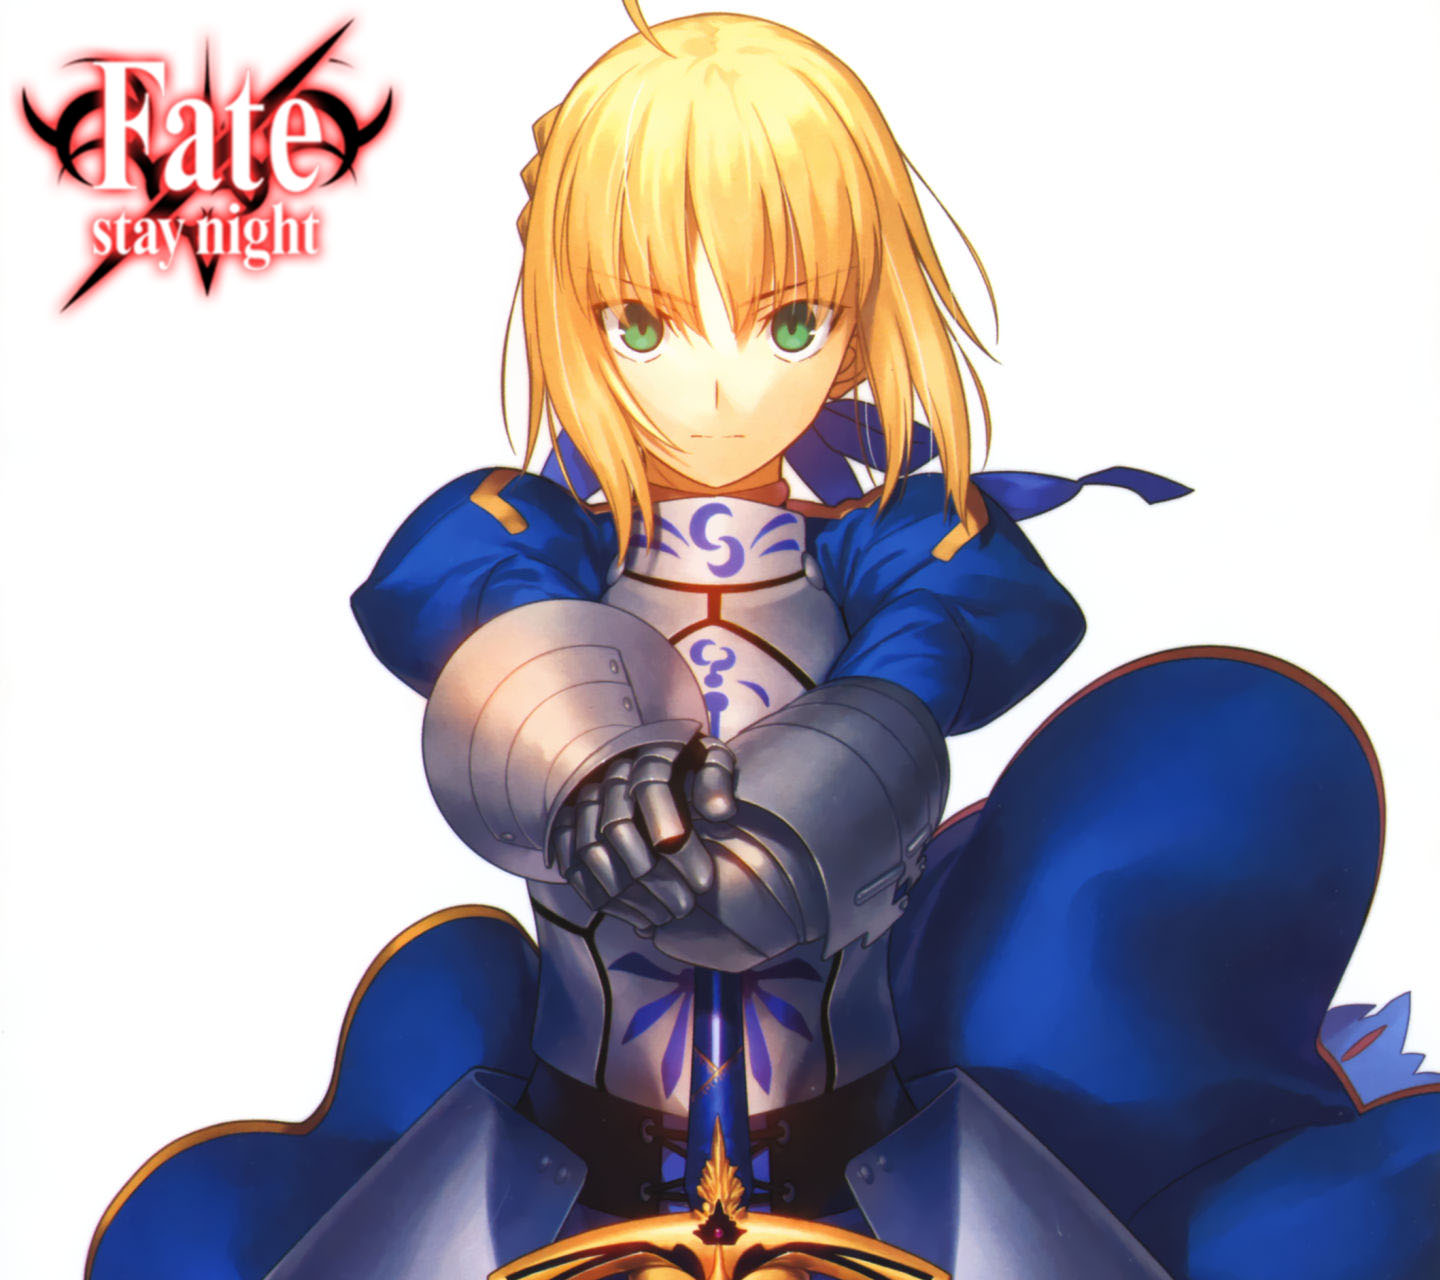 Fate Stay Night Android壁紙 画像 10 1440 1280 アニメ壁紙ネット Pc Android Iphone壁紙 画像